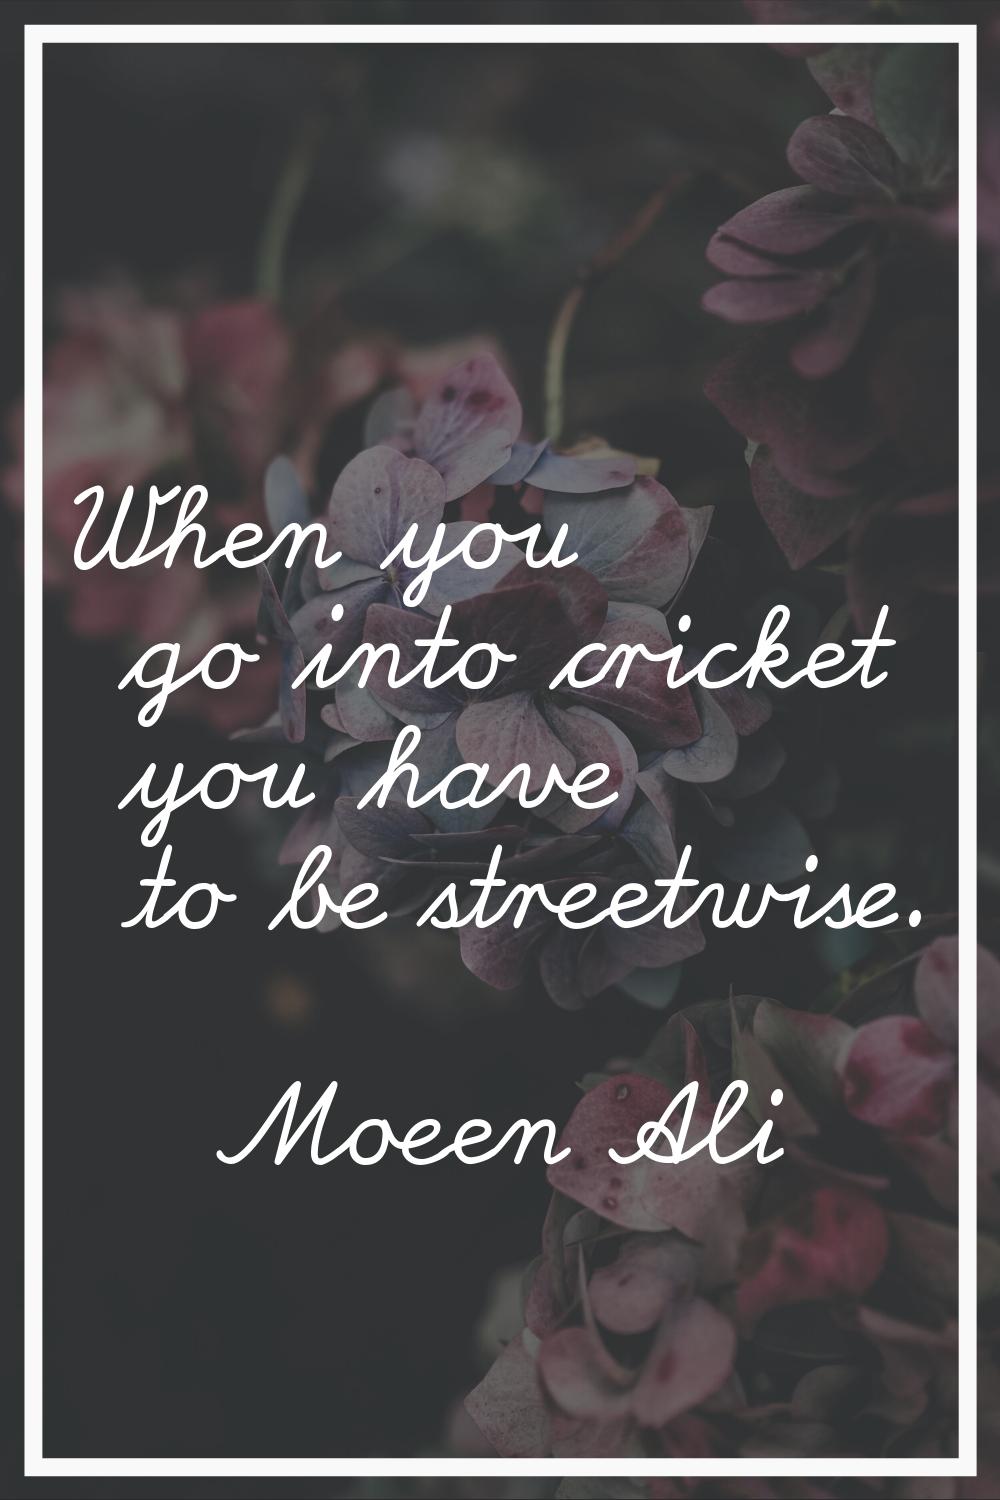 When you go into cricket you have to be streetwise.